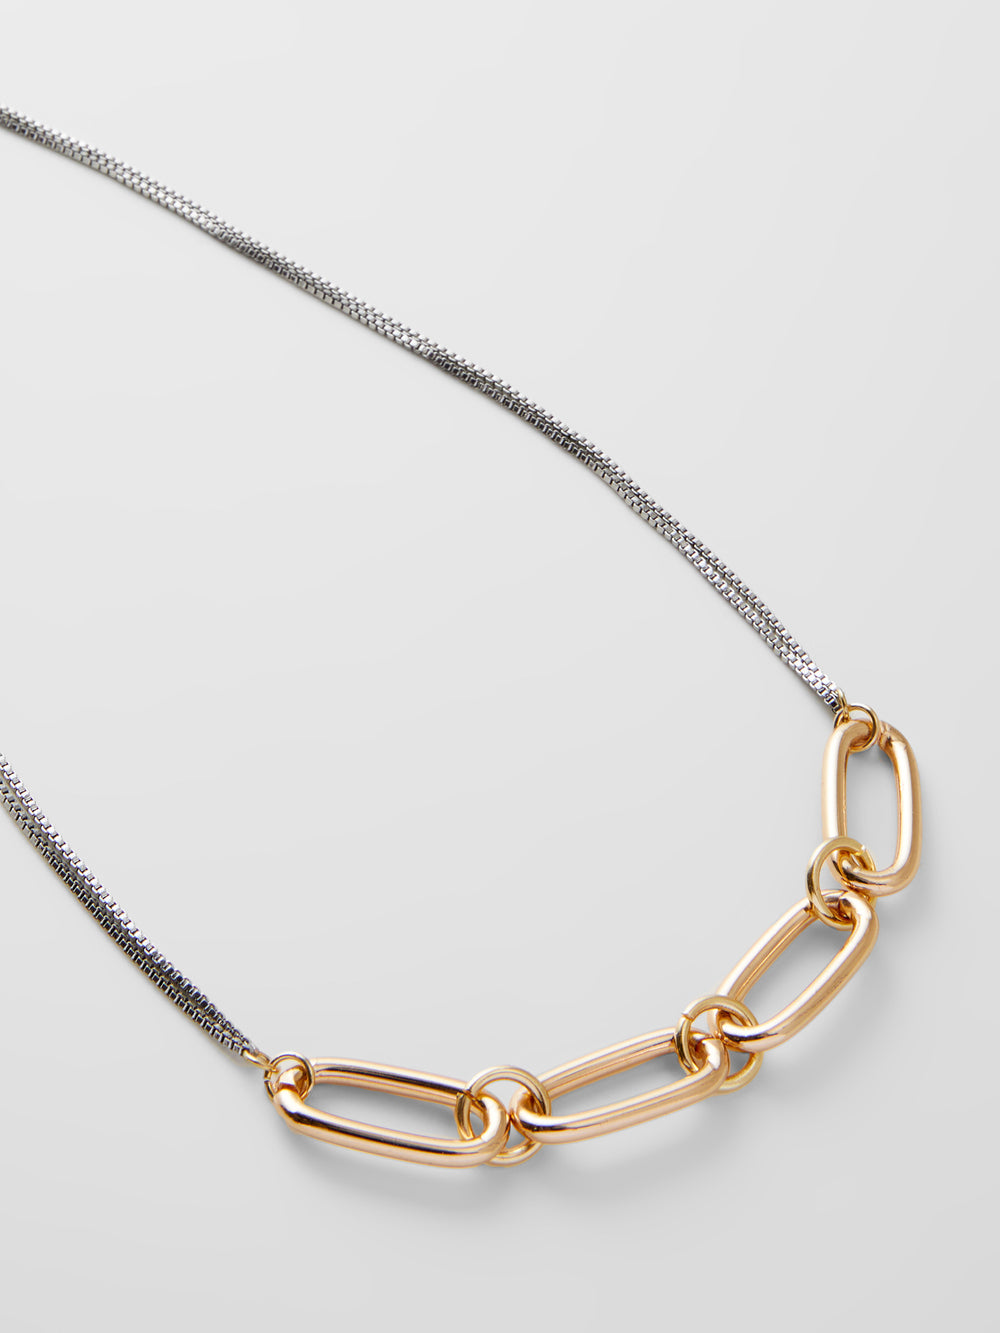 Large Oval Gold Link Necklace | Gold Jewelry NYC | Gold Chain Necklace